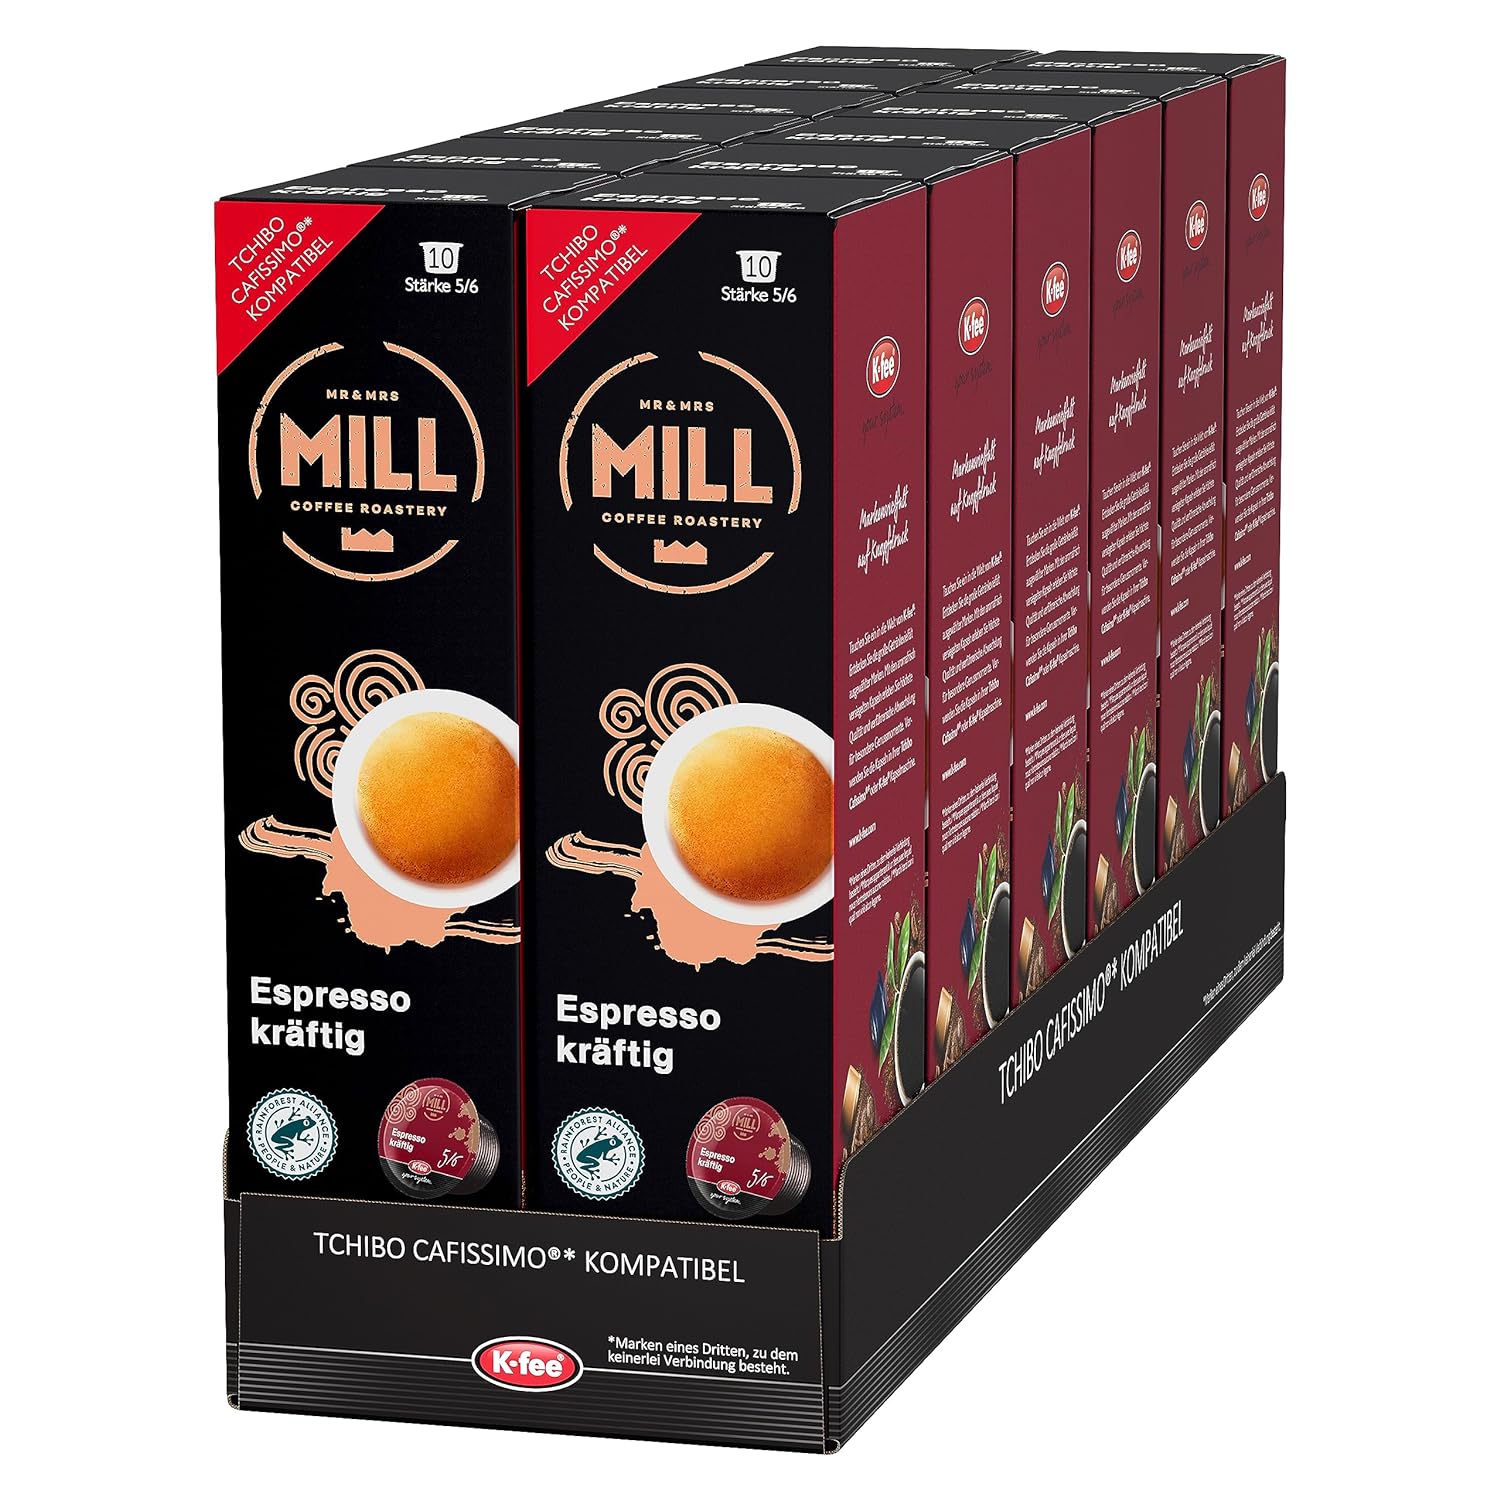 MR & MRS Mill Capsules Espresso Powerful, Strength 5/6, Compatible with K-Fee & Tchibo Cafissimo*, Rainforest Alliance Certified, 120 Capsules (12 x 10)